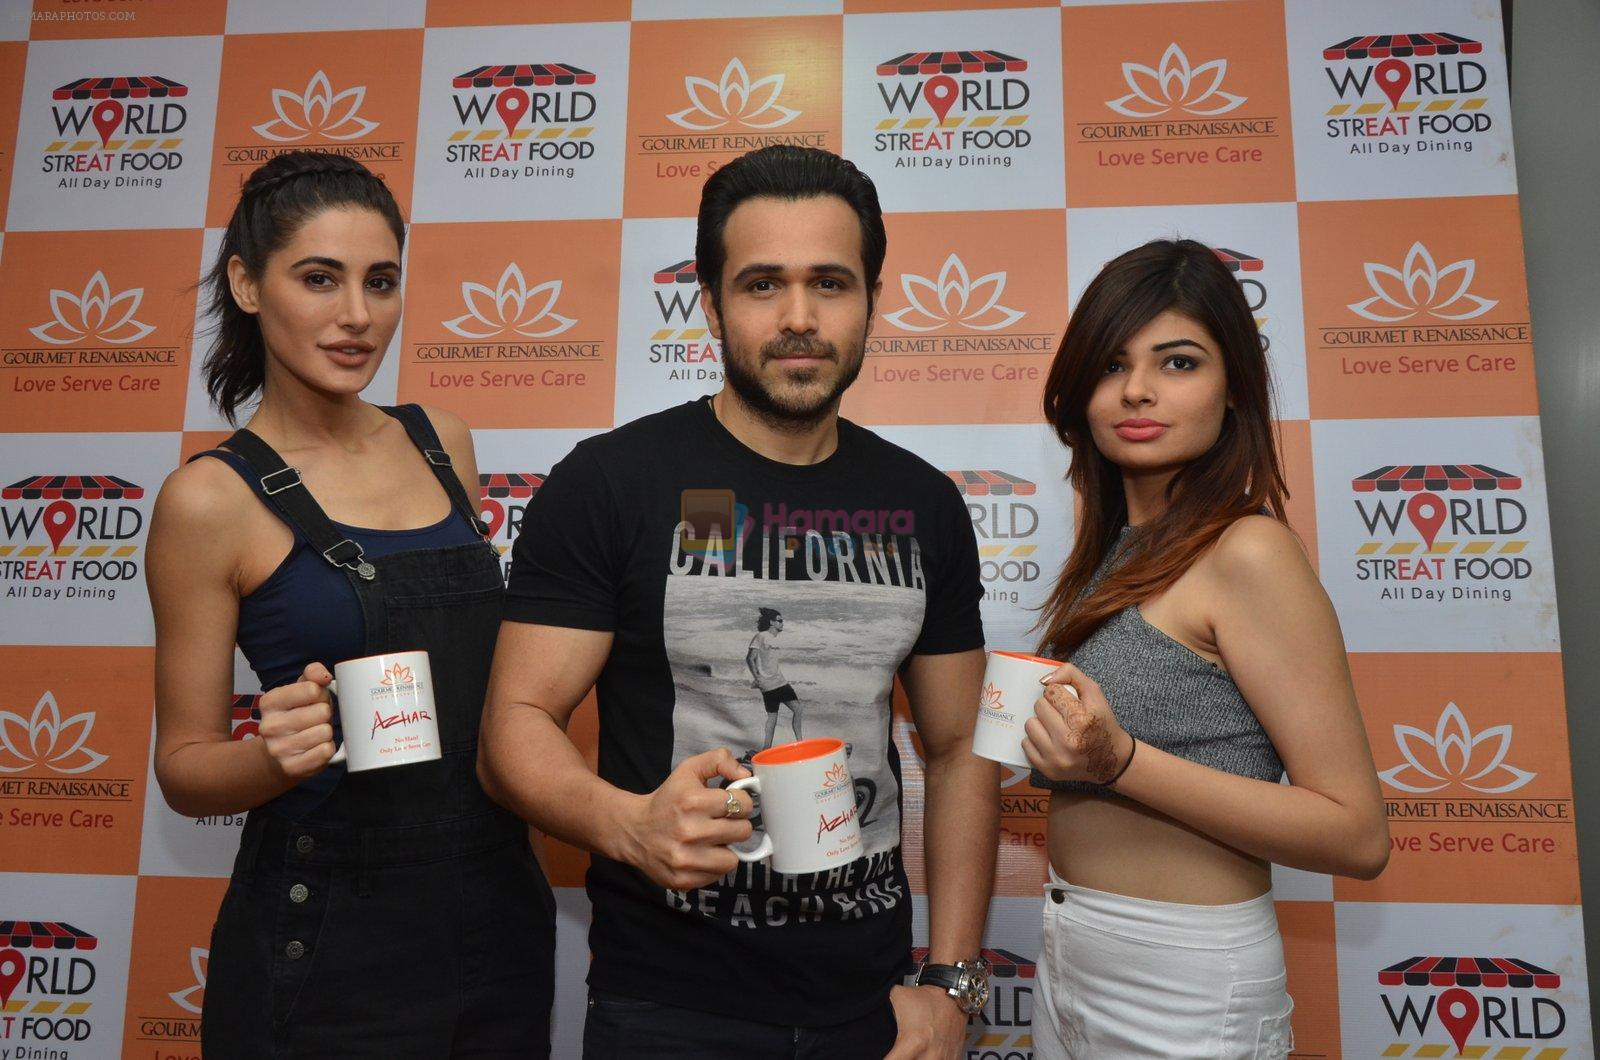 christina bharwani, emran hashmi and nargis fakhri at Azhar promotions in association with Gourmet Renaissance at IPL match in Pune on 9th May 2016